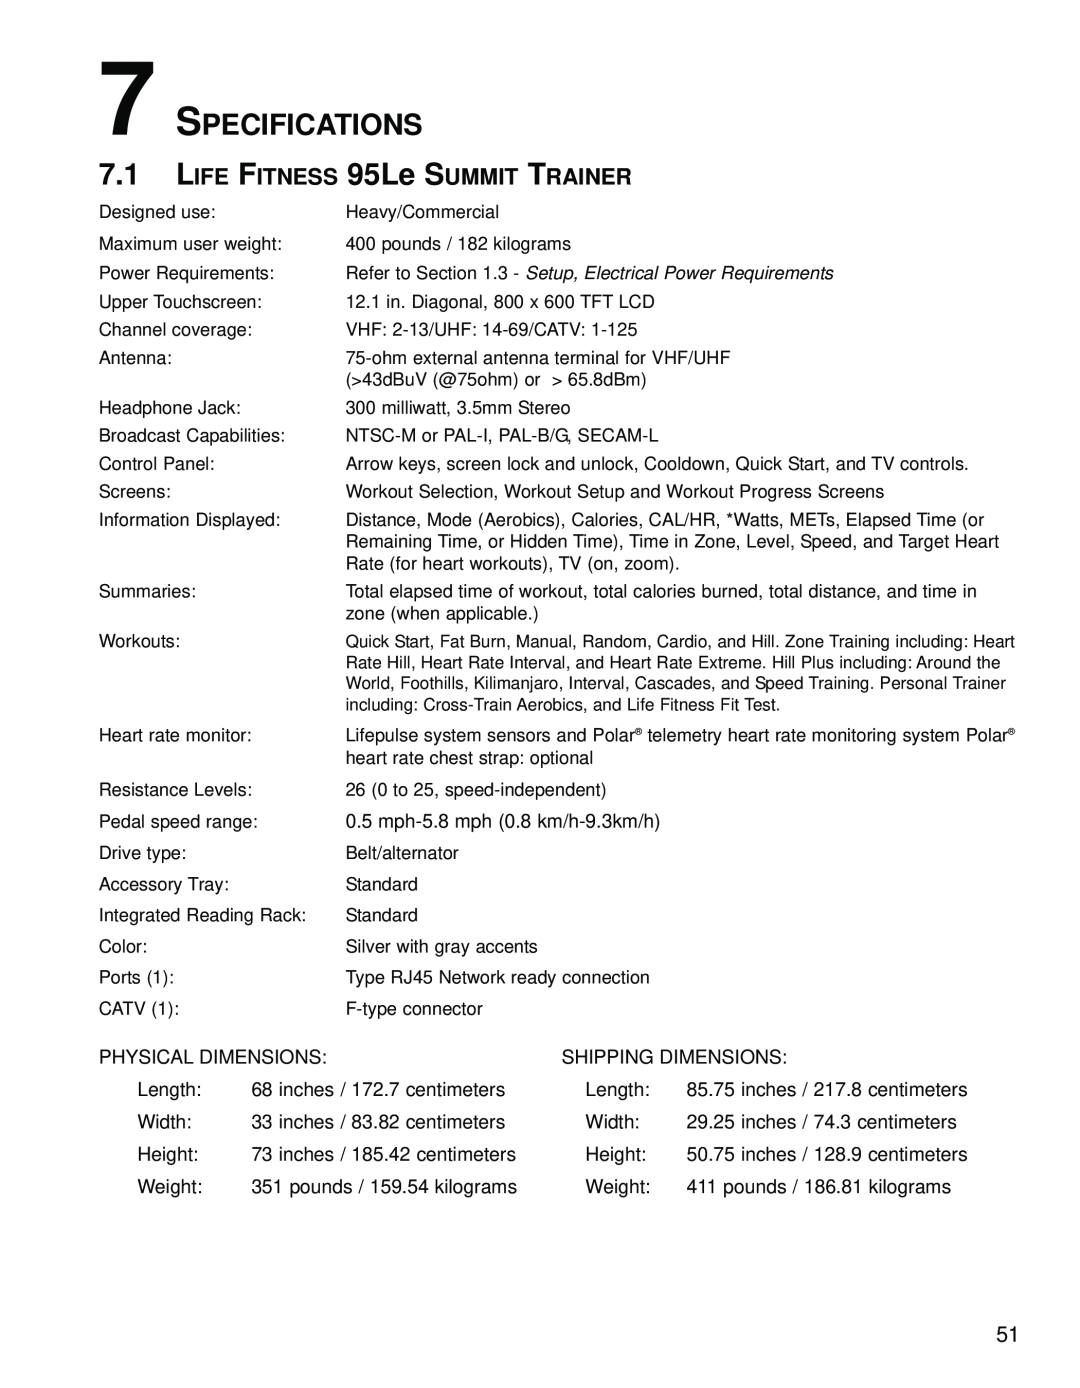 Life Fitness operation manual Specifications, LIFE FITNESS 95Le SUMMIT TRAINER 